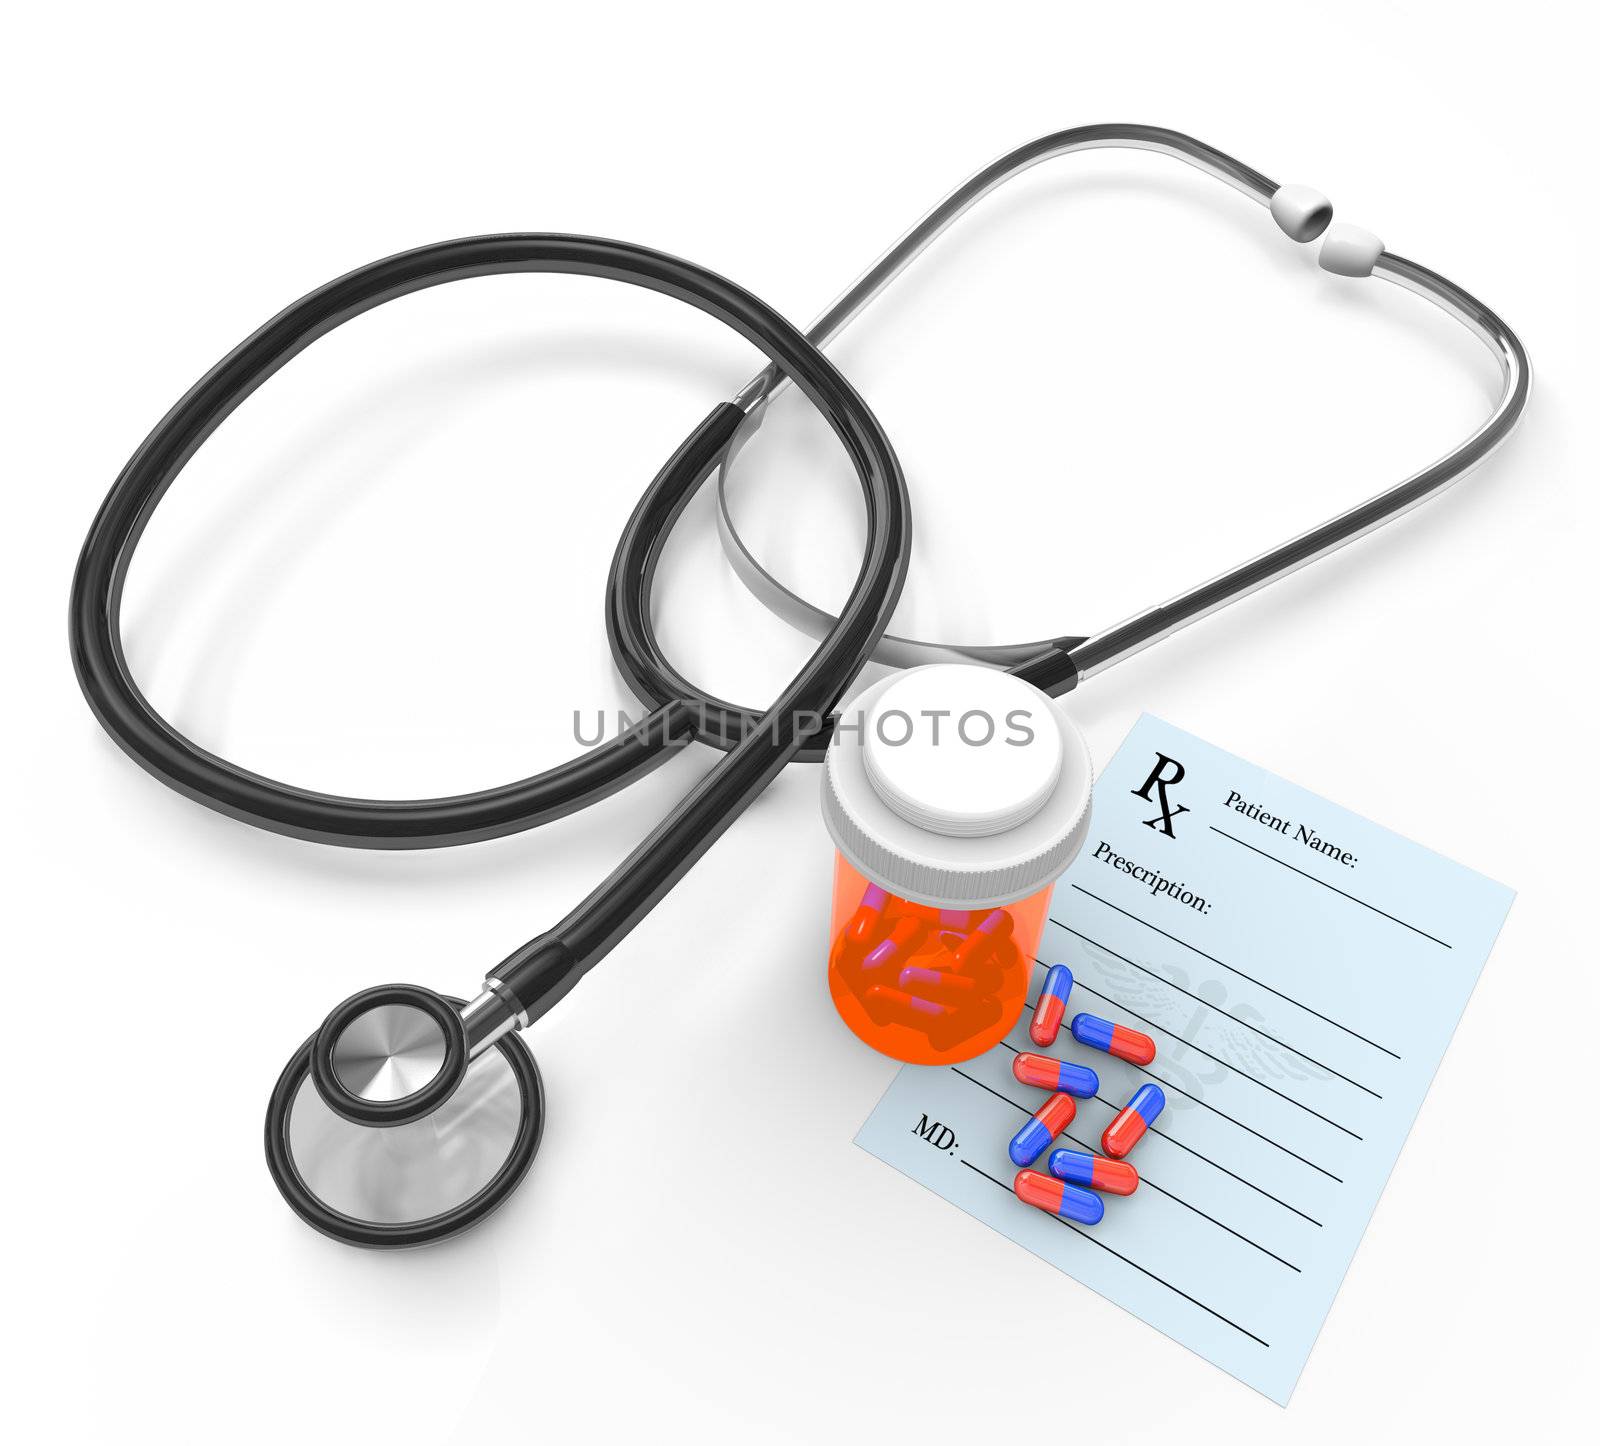 A black stethoscope on a white background with a medicine bottle and prescribed capsule pills